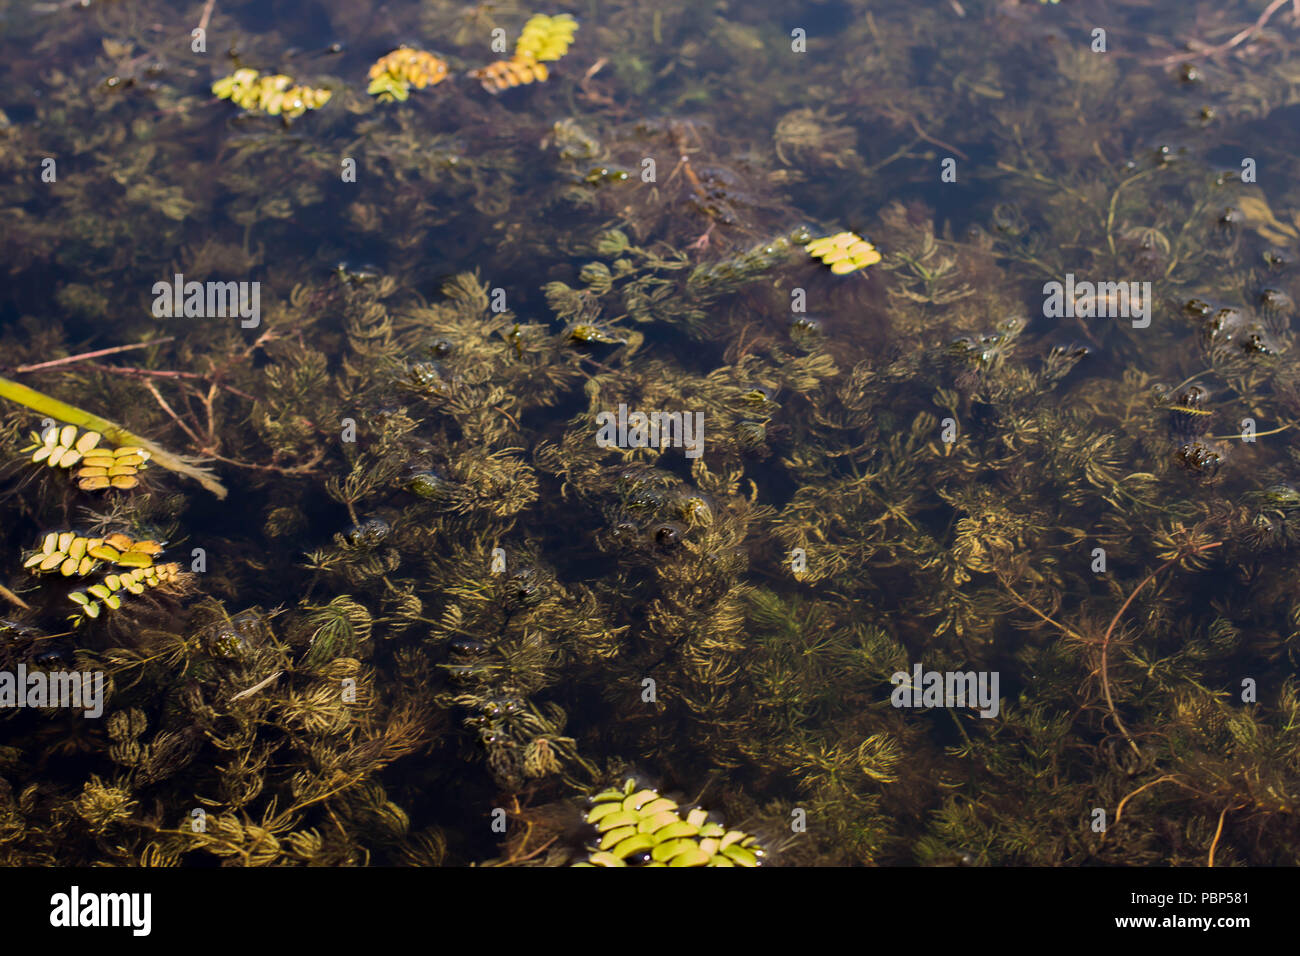 Submerged stems of Ceratophyllum demersum in lake of Special nature reserve Zasavica in Serbia Stock Photo